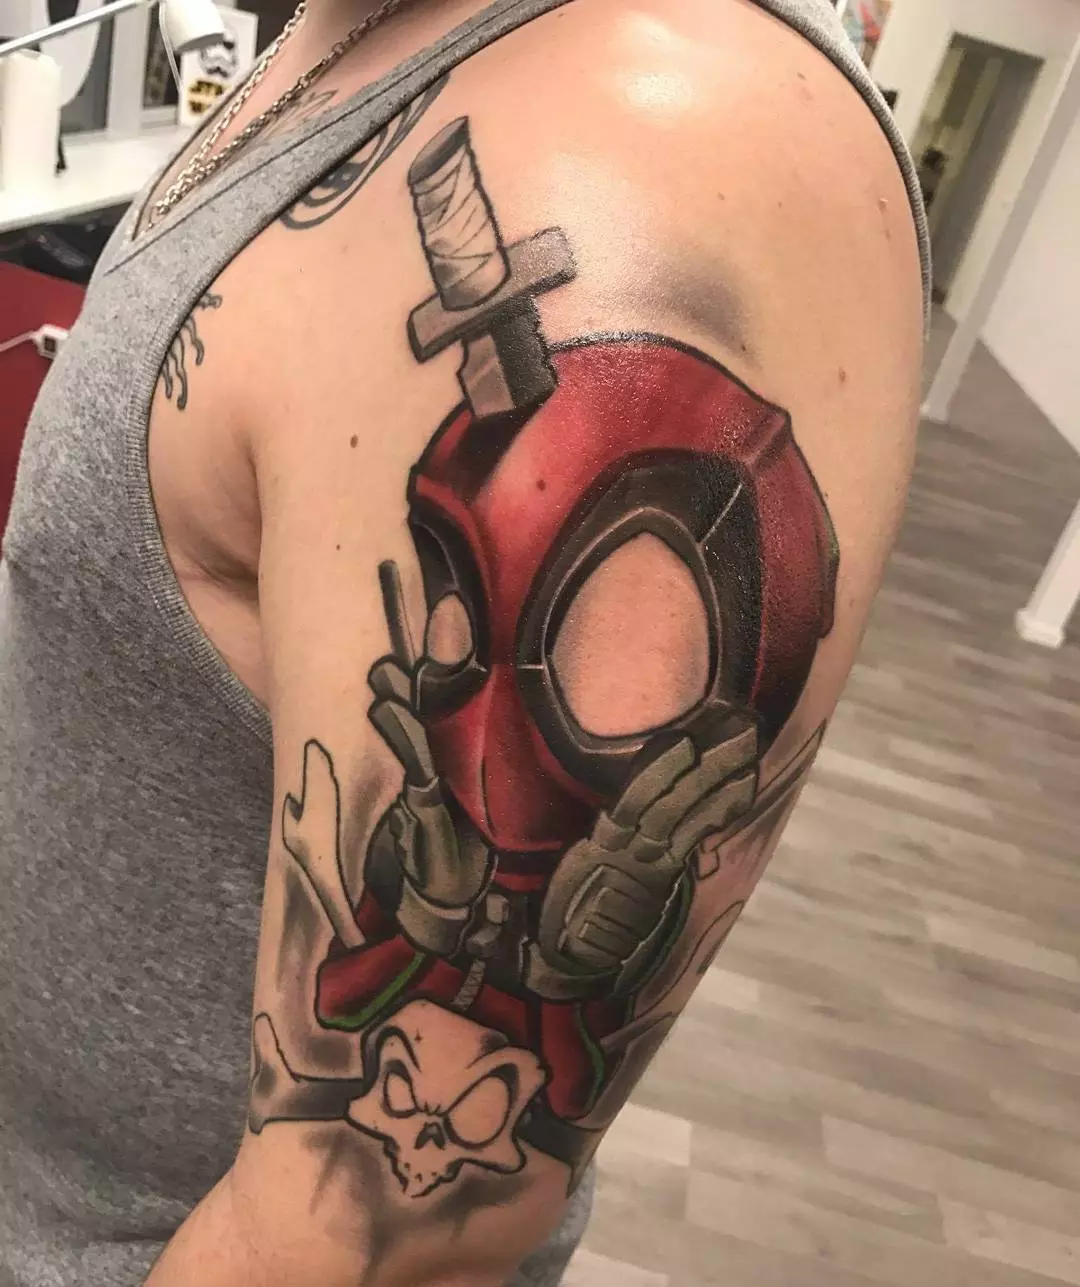 70+ Dashing Deadpool Tattoo Designs - Redefining Deadpool with Ink